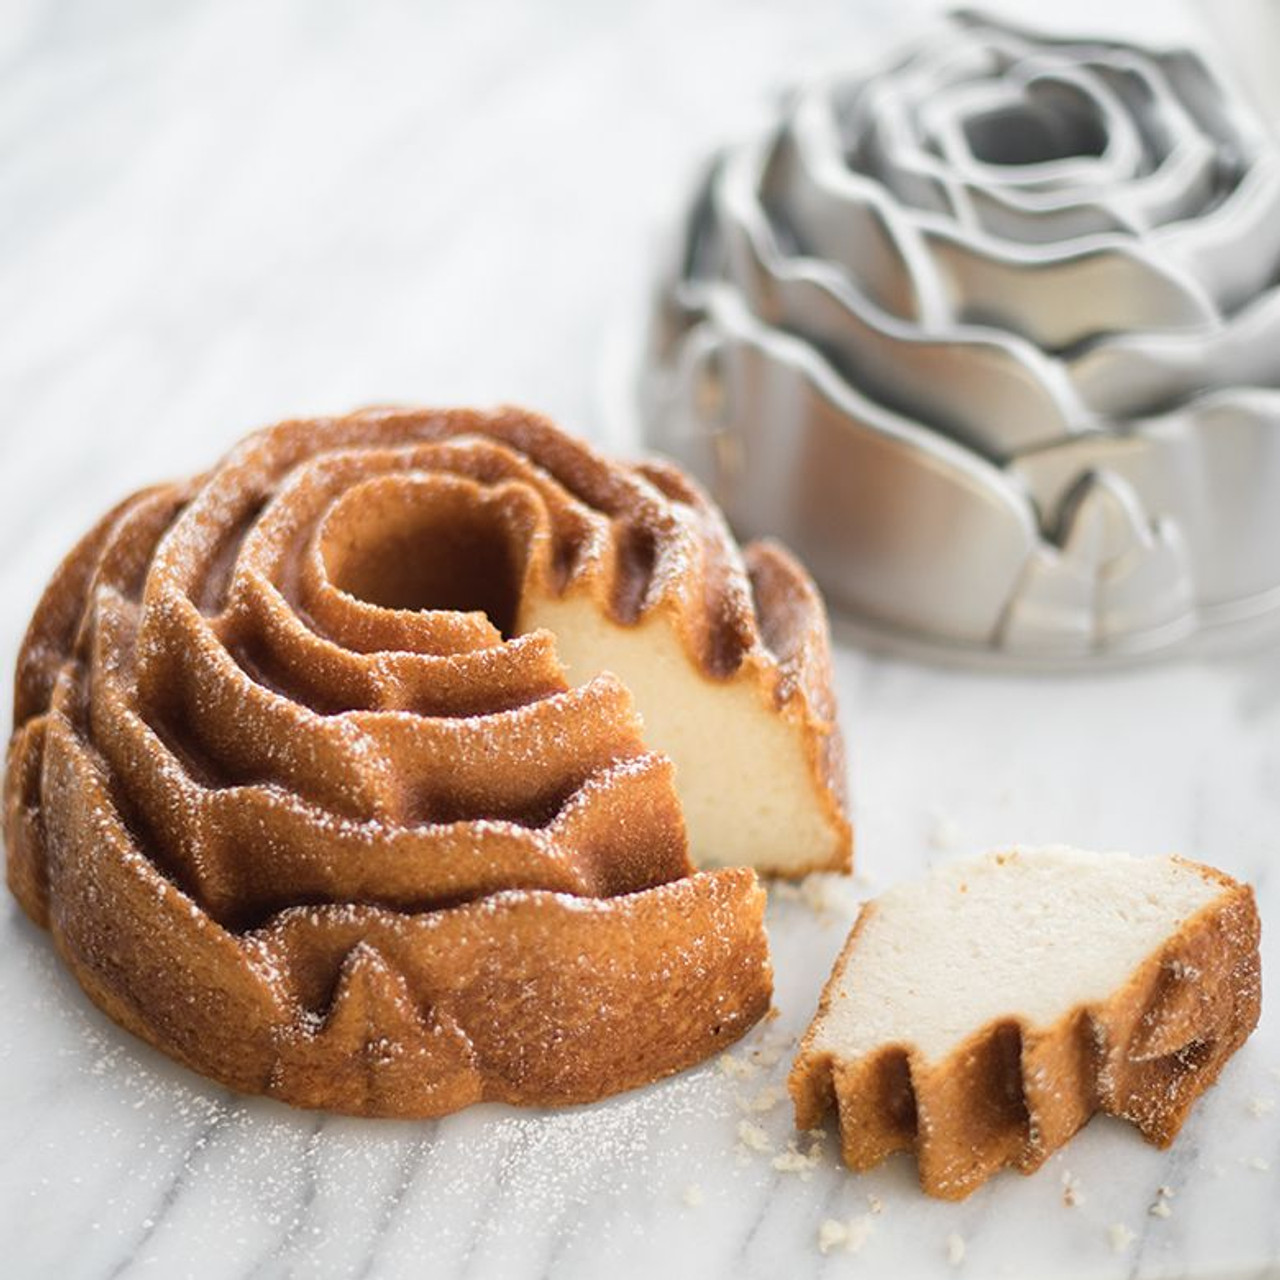 https://cdn11.bigcommerce.com/s-hccytny0od/images/stencil/1280x1280/products/721/4008/nordic-ware-rose-bundt-pan-2__93689.1514685144.jpg?c=2?imbypass=on